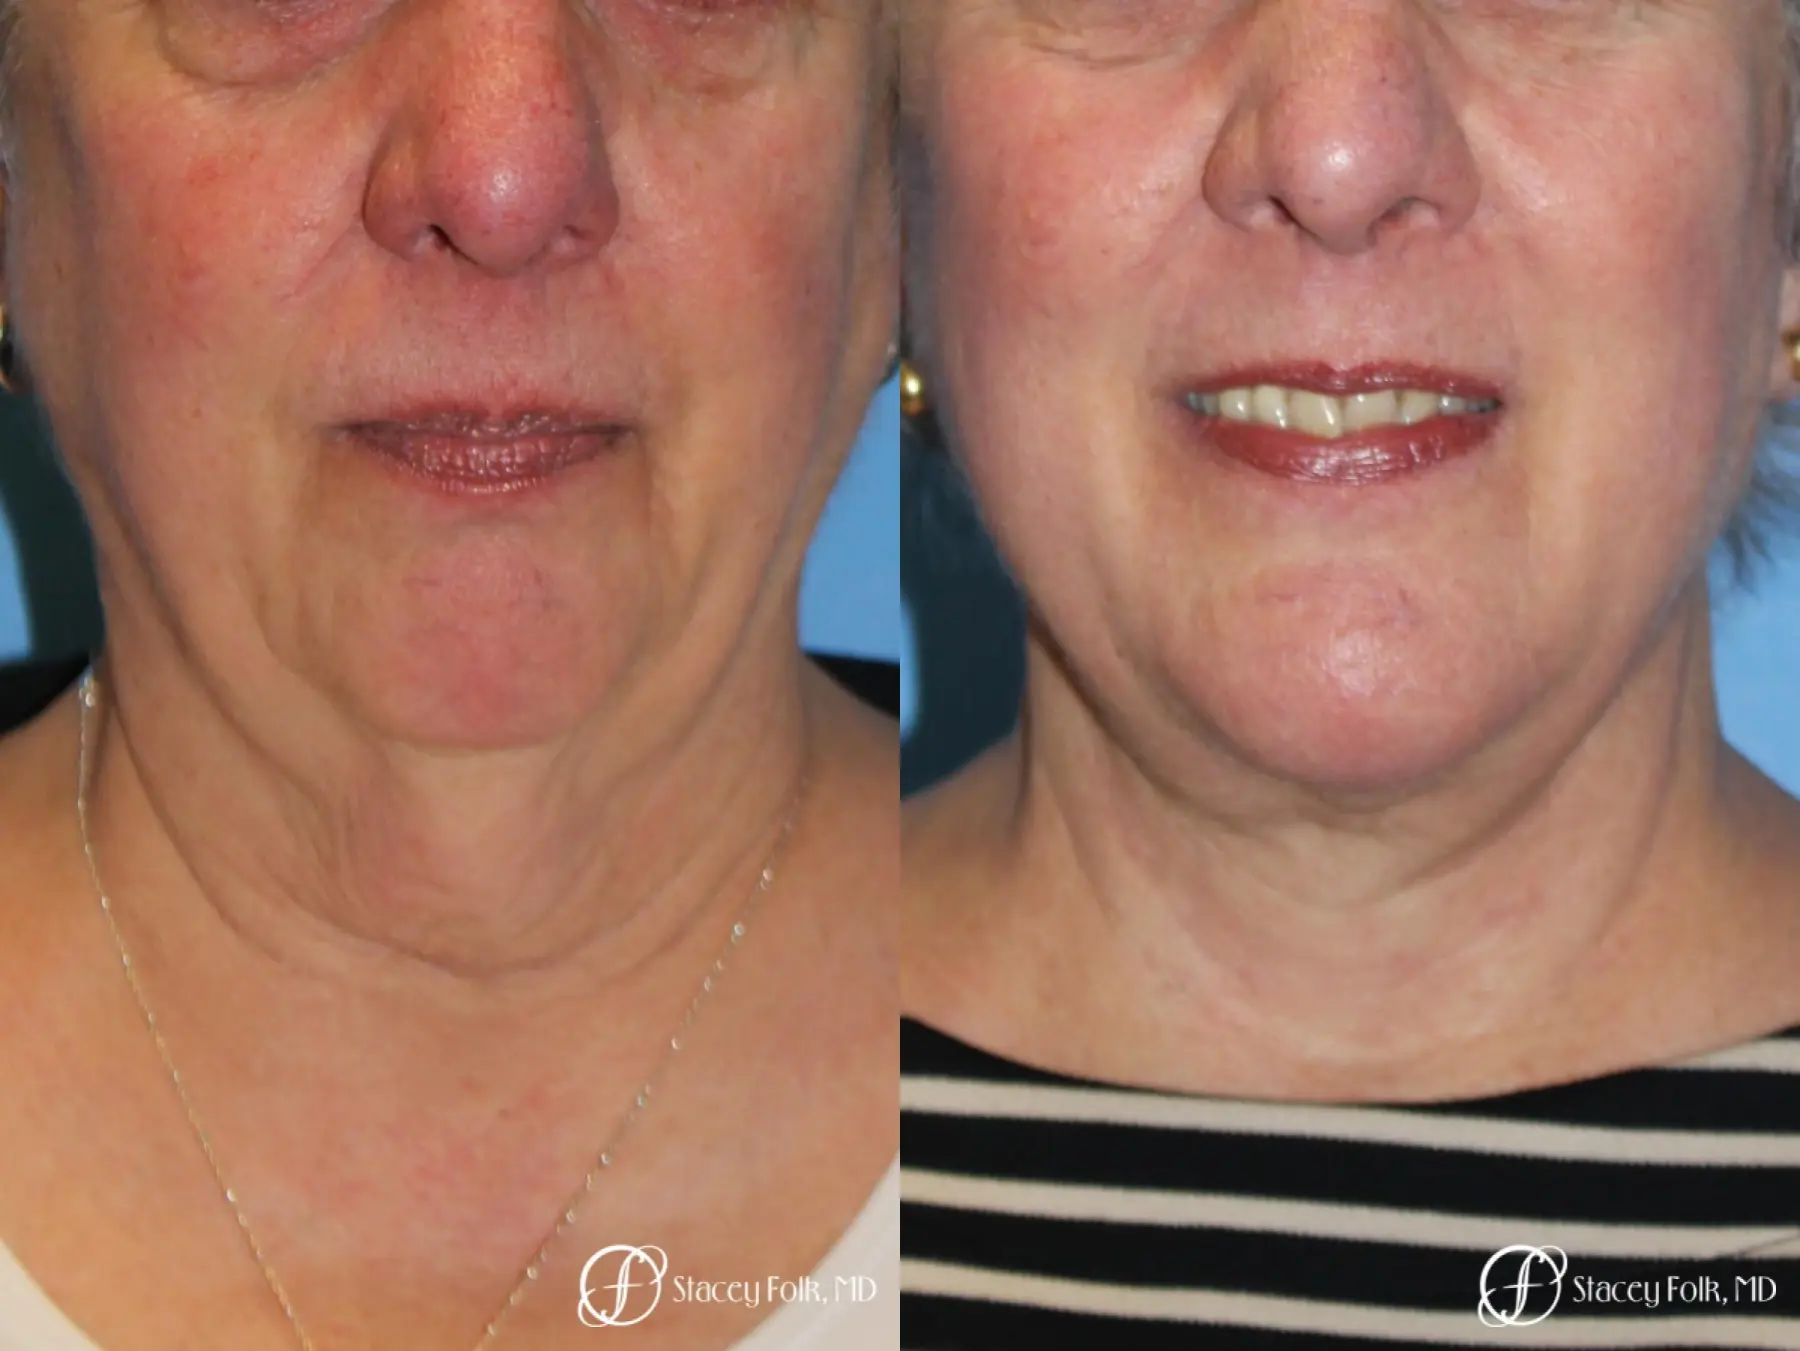 Denver Facial Rejuvenation Face and Neck Lift with Fat Transfer to the Face 9133 - Before and After 2